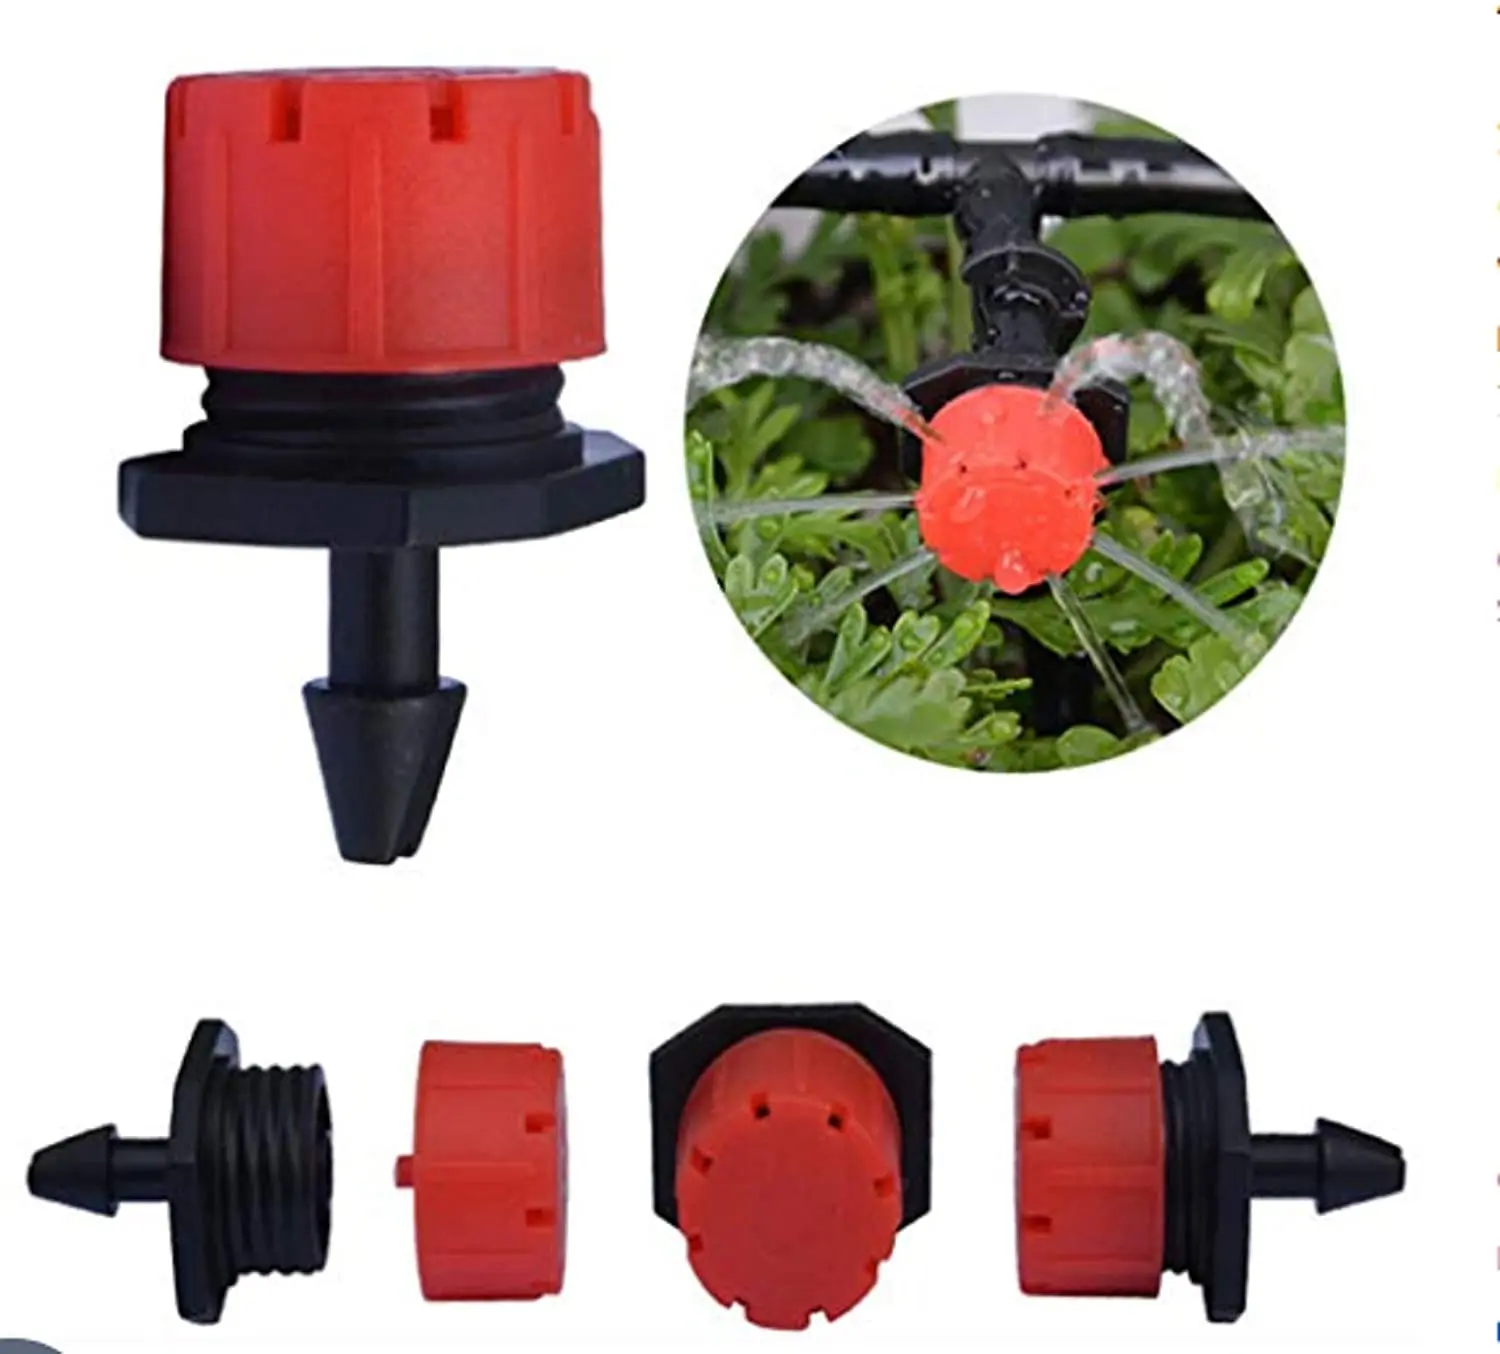 Micro Drip Irrigation Garden set Watering System Automatic Hose Kit